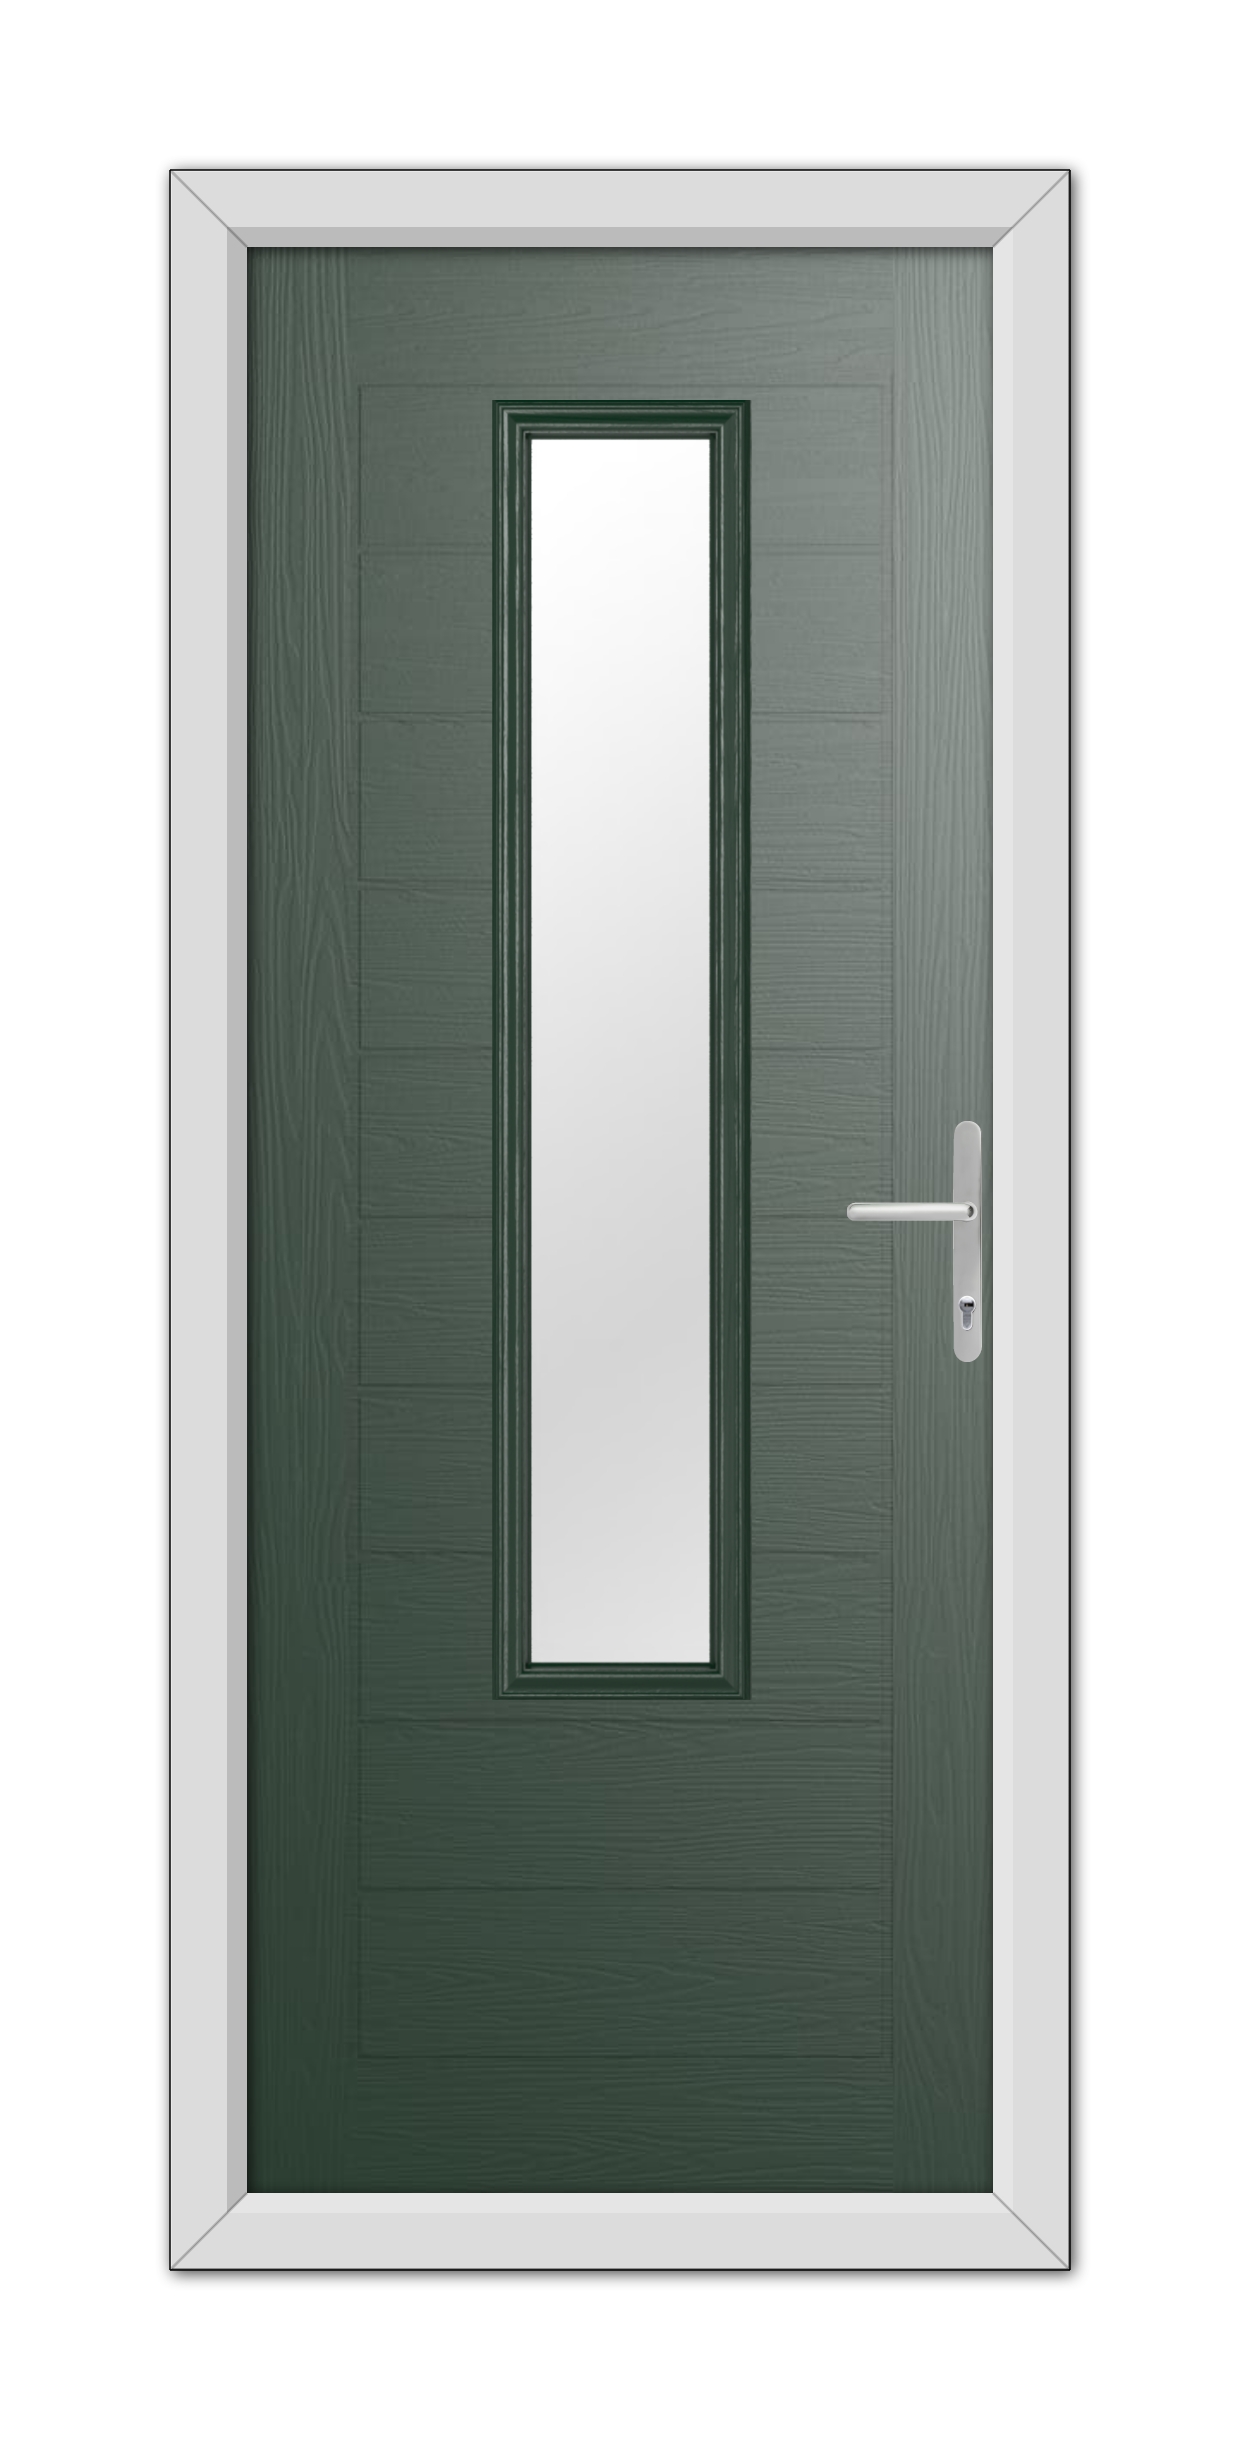 A Green Bedford Composite Door 48mm Timber Core with a vertical rectangular window and a white handle, set in a white frame.